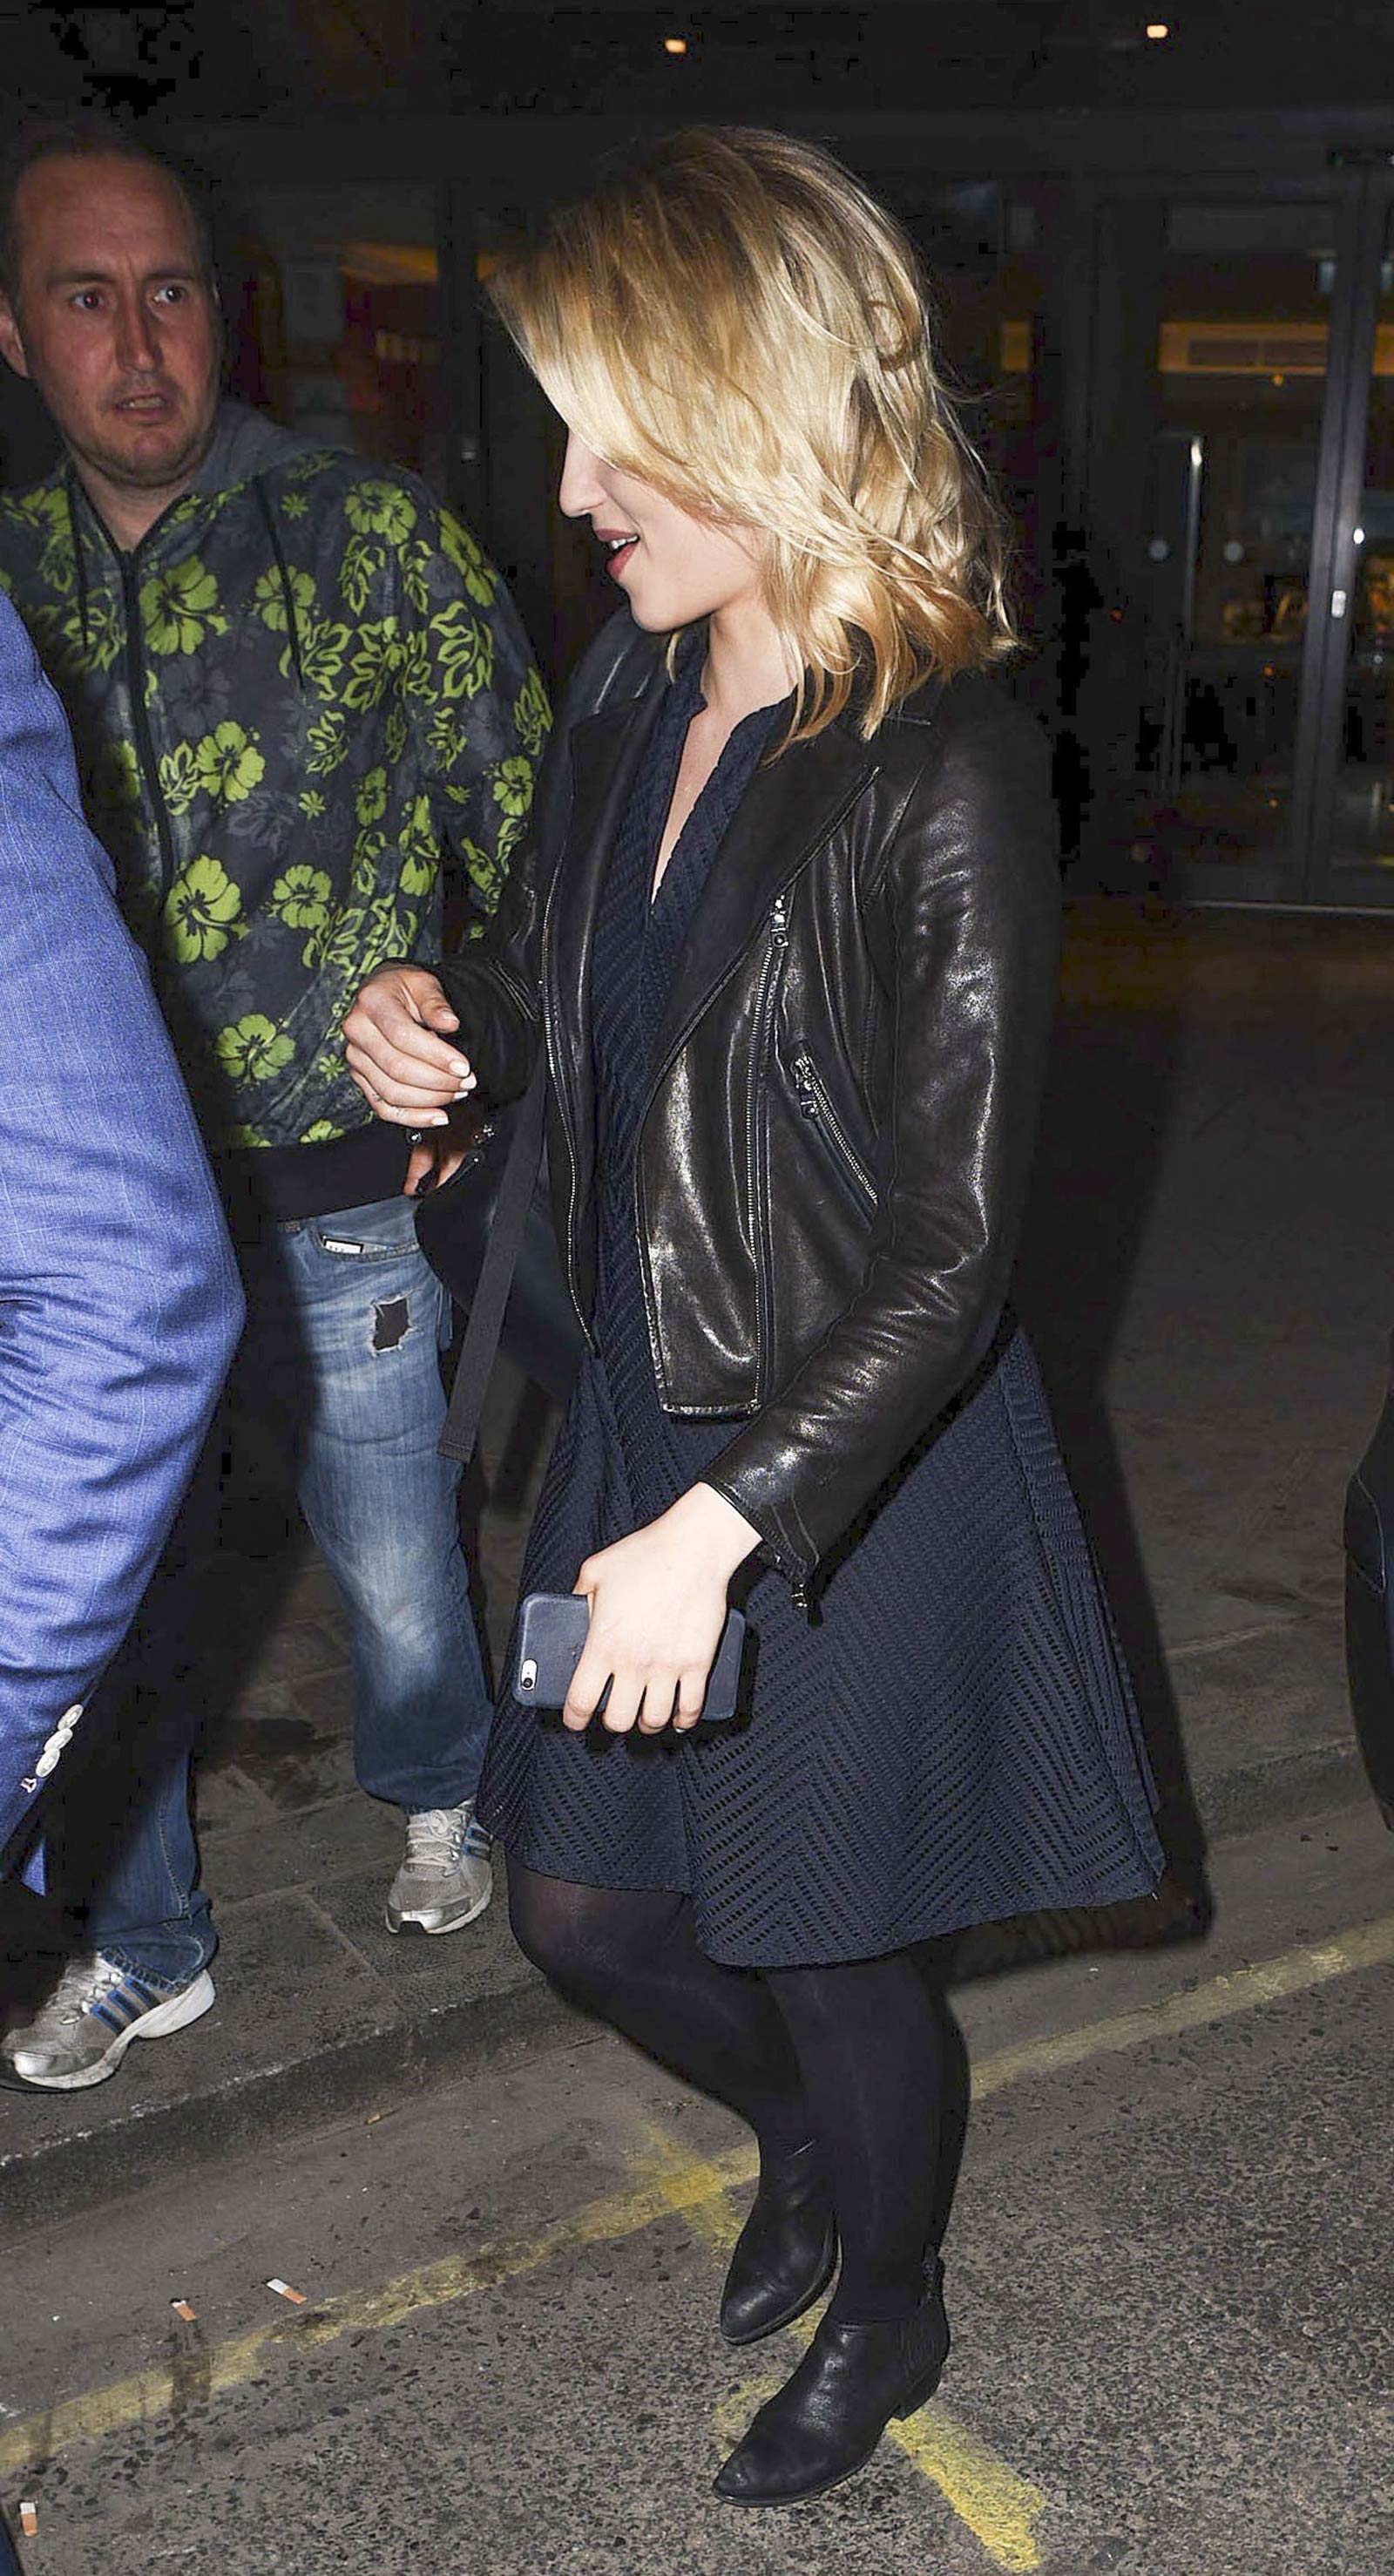 Dianna Agron leaving the St. James Theatre